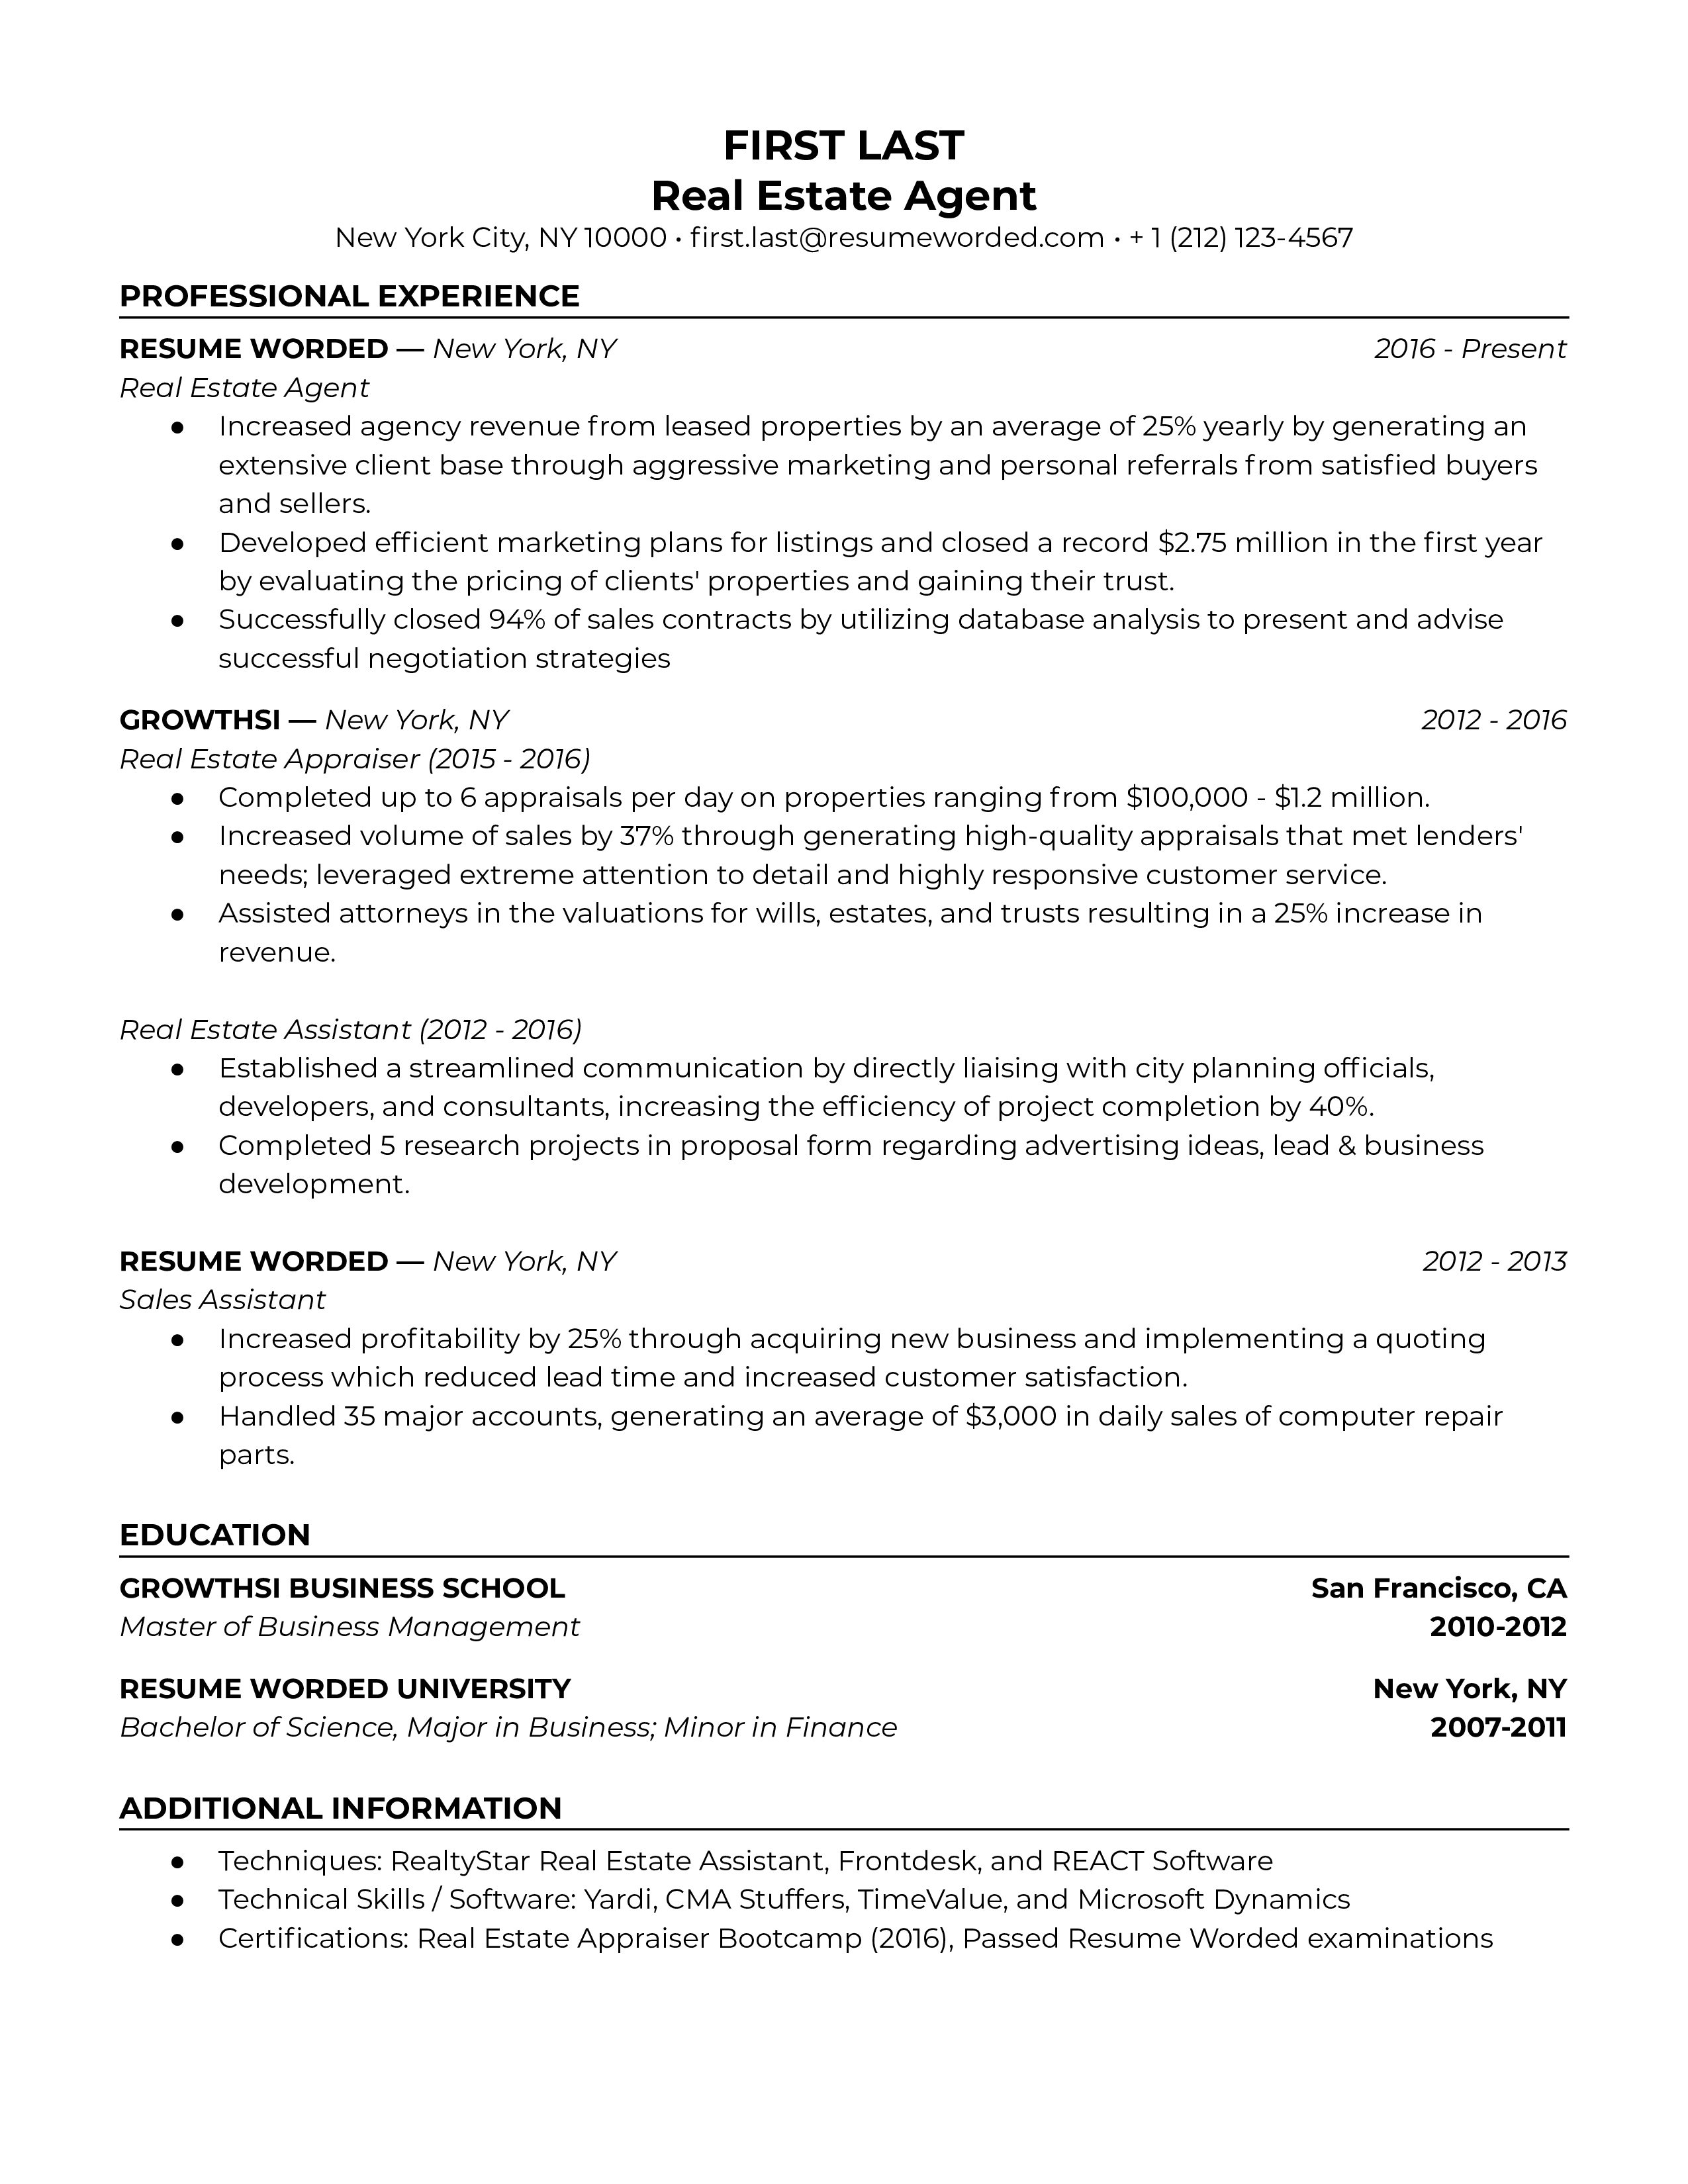 Real estate agent resume highlighting tech skills and local market knowledge.